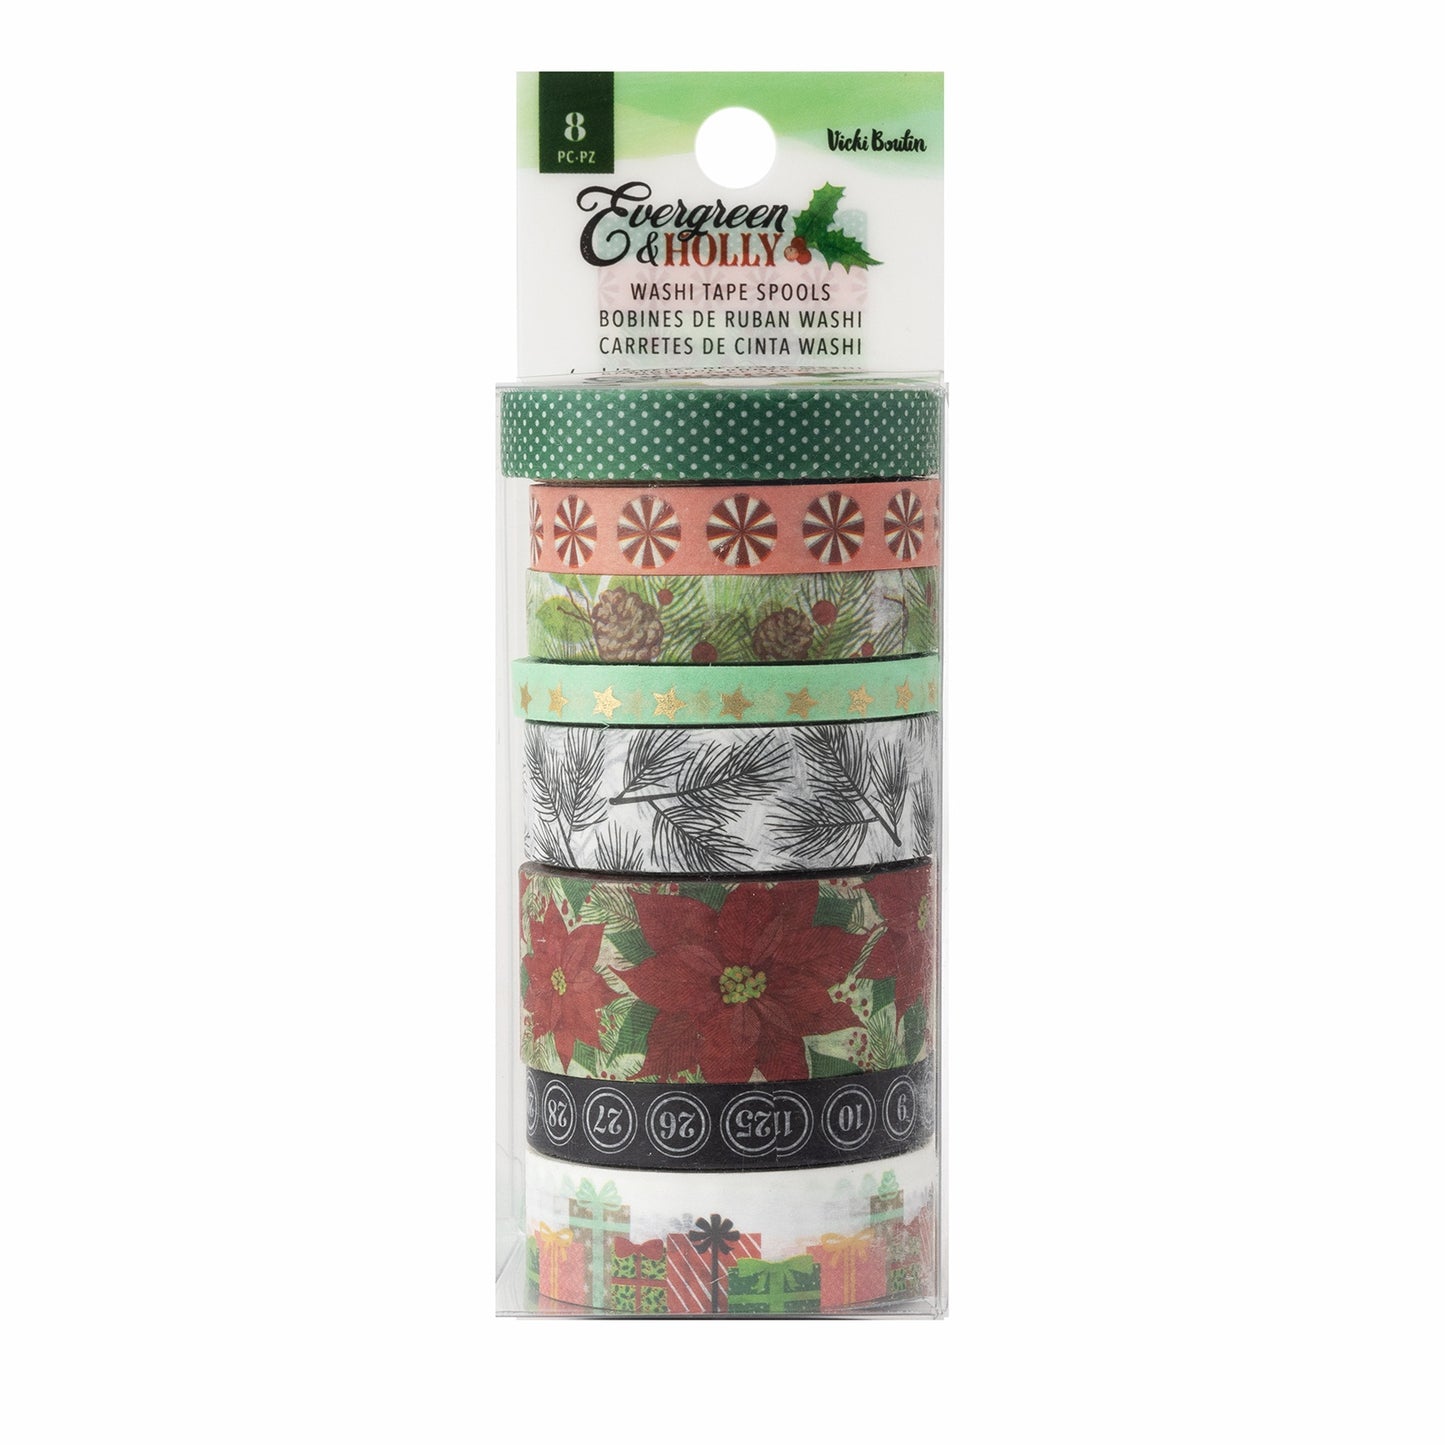 Vicki Boutin Evergreen & Holly Washi Tape 8/Pkg-W/Gold Foil Accents